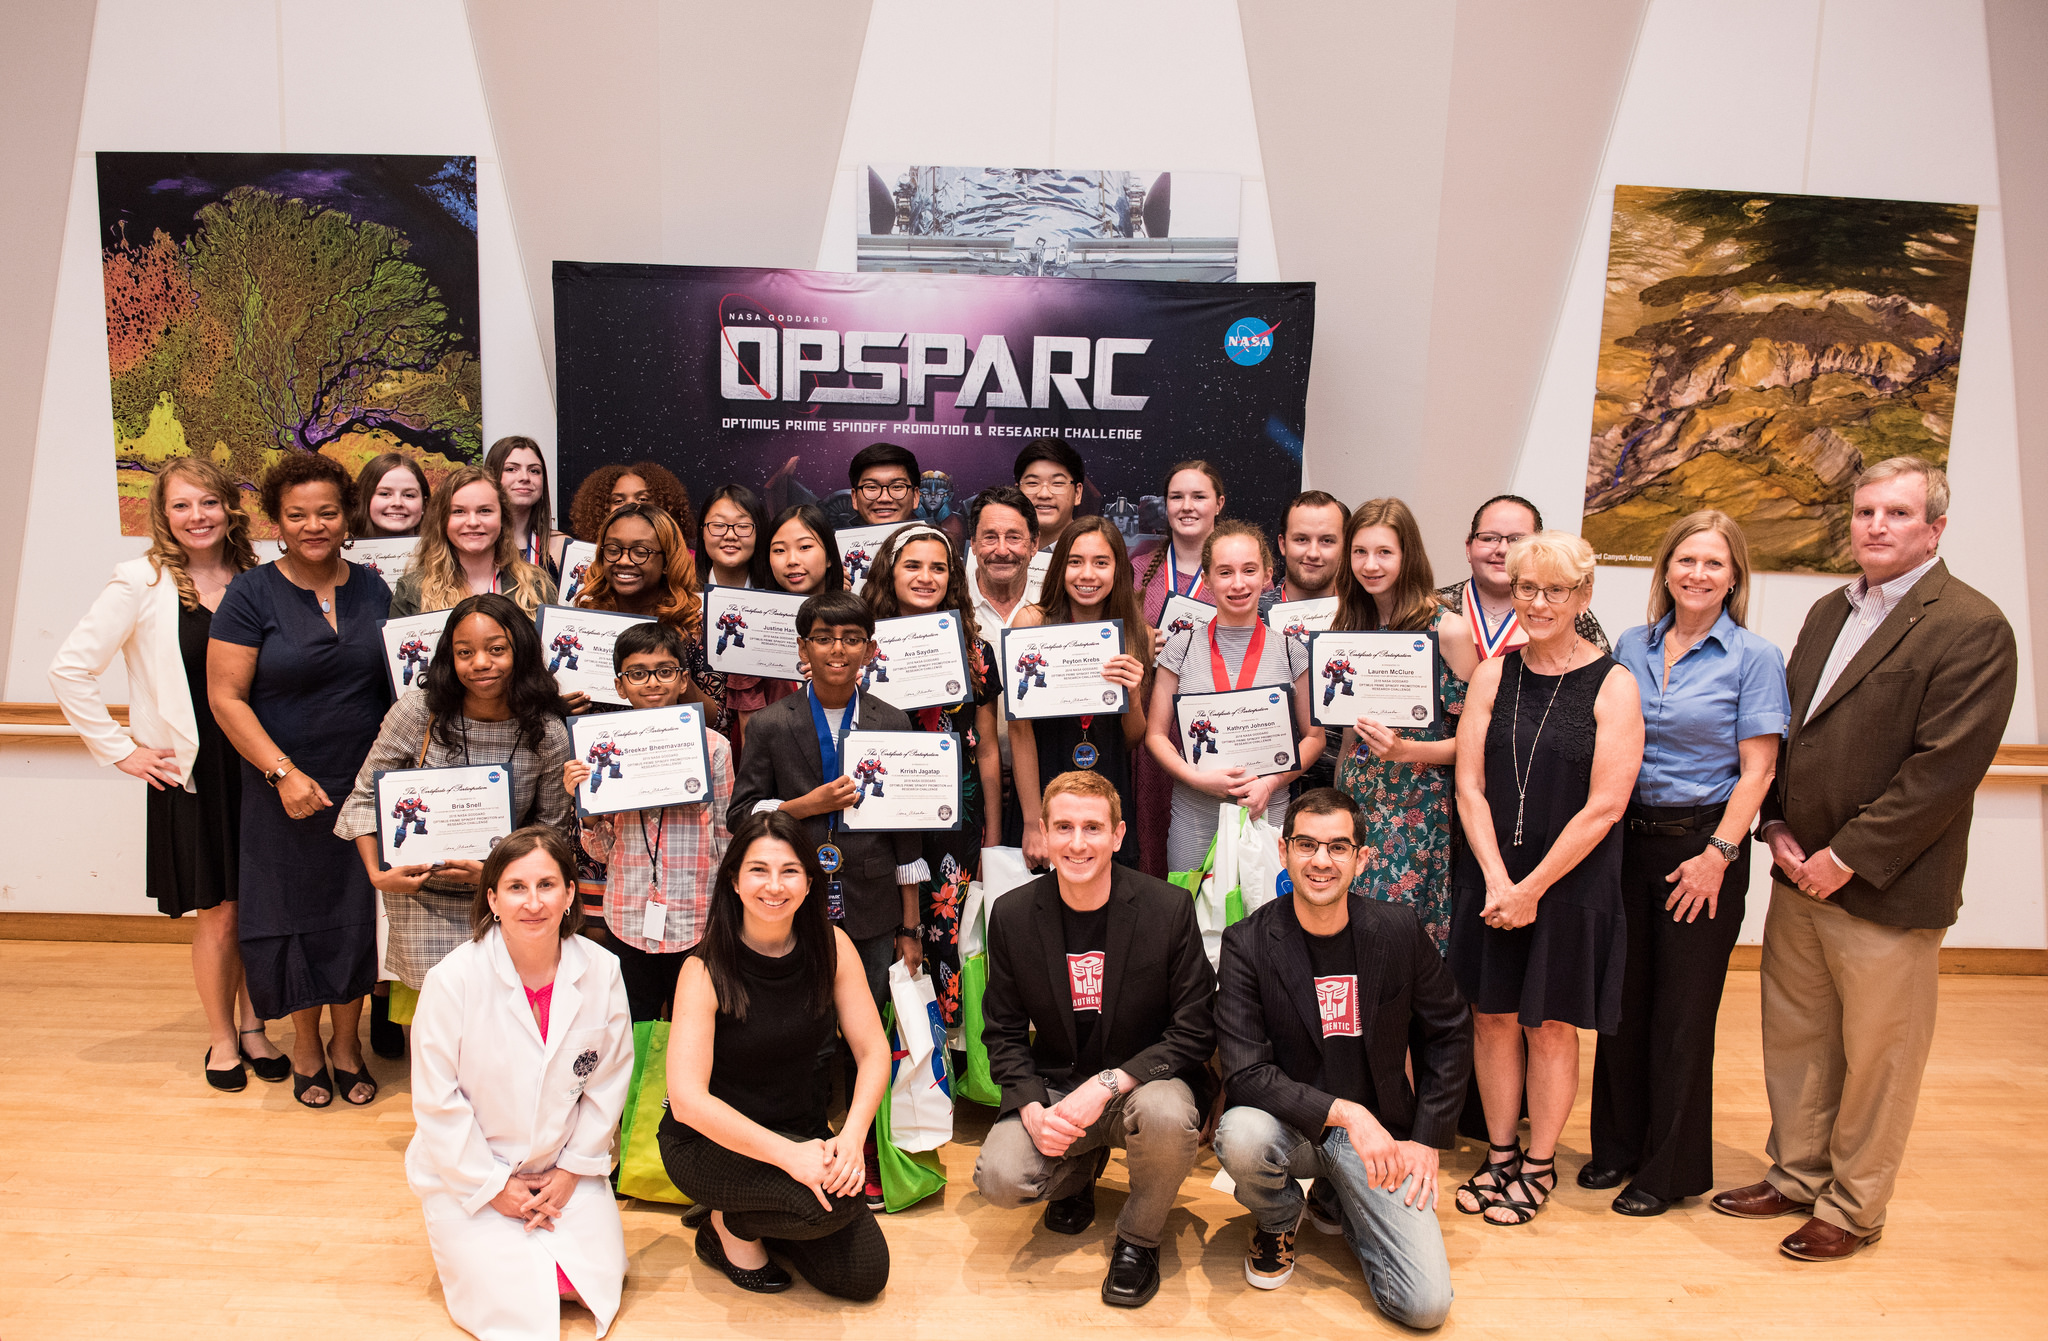 The OPSPARC team came together for the OPSPARC 2018 awards ceremony on June 14, 2018.